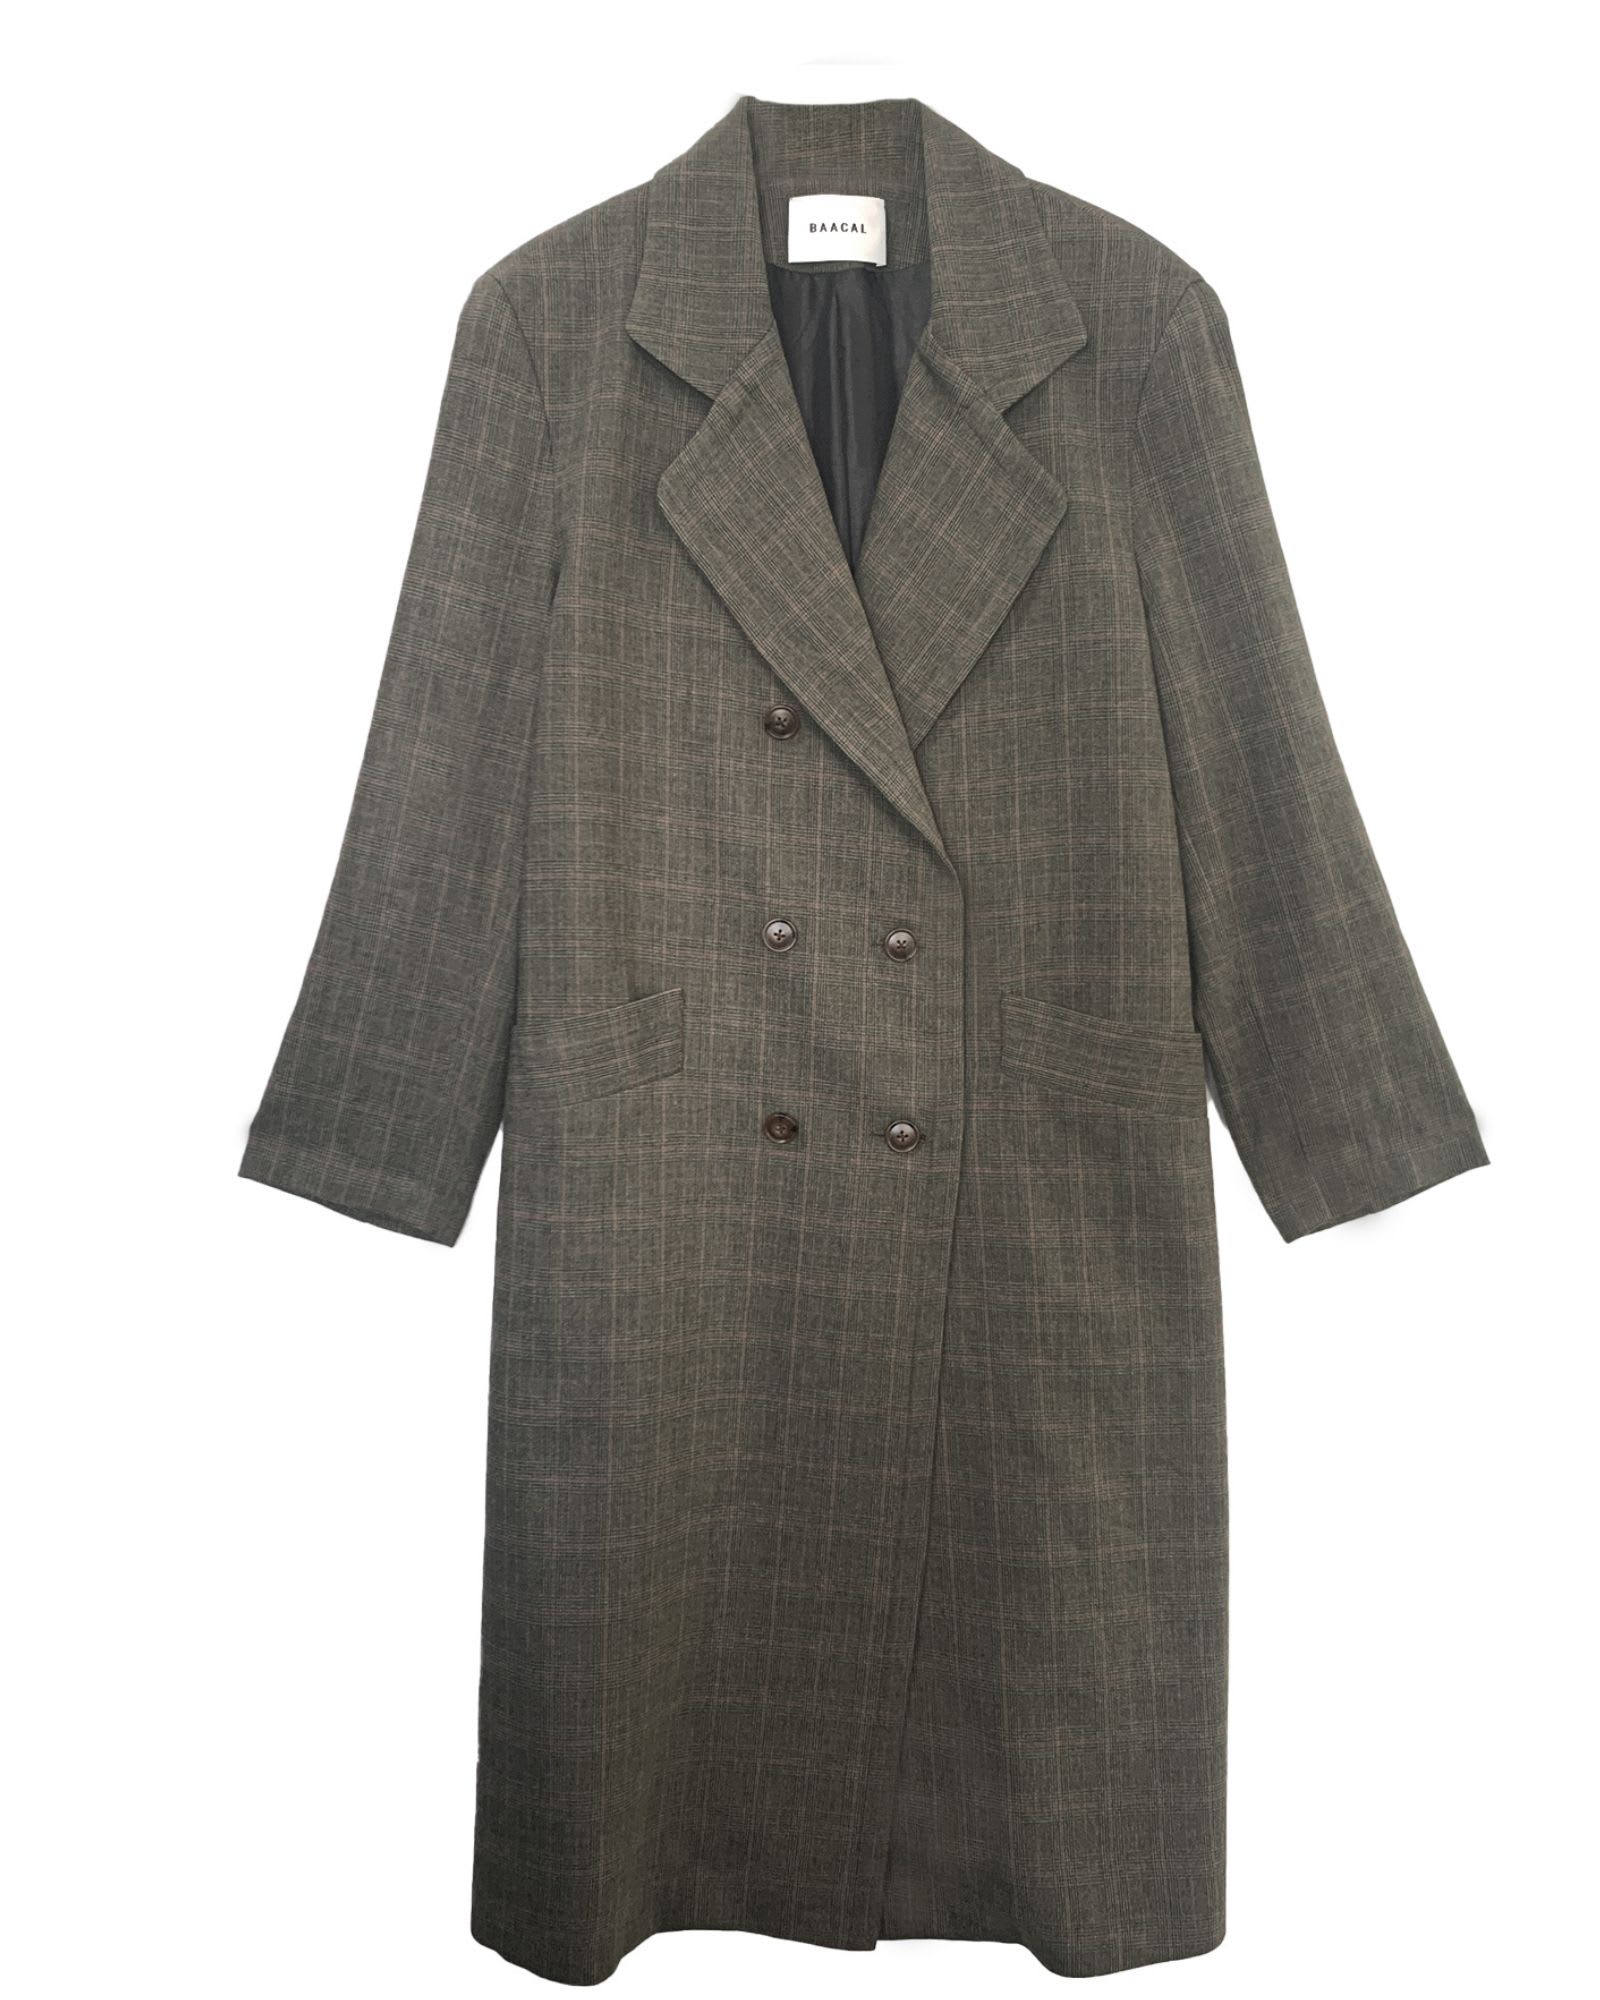 The Double Breasted Car Coat in Prince of Wales | Prince of Wales